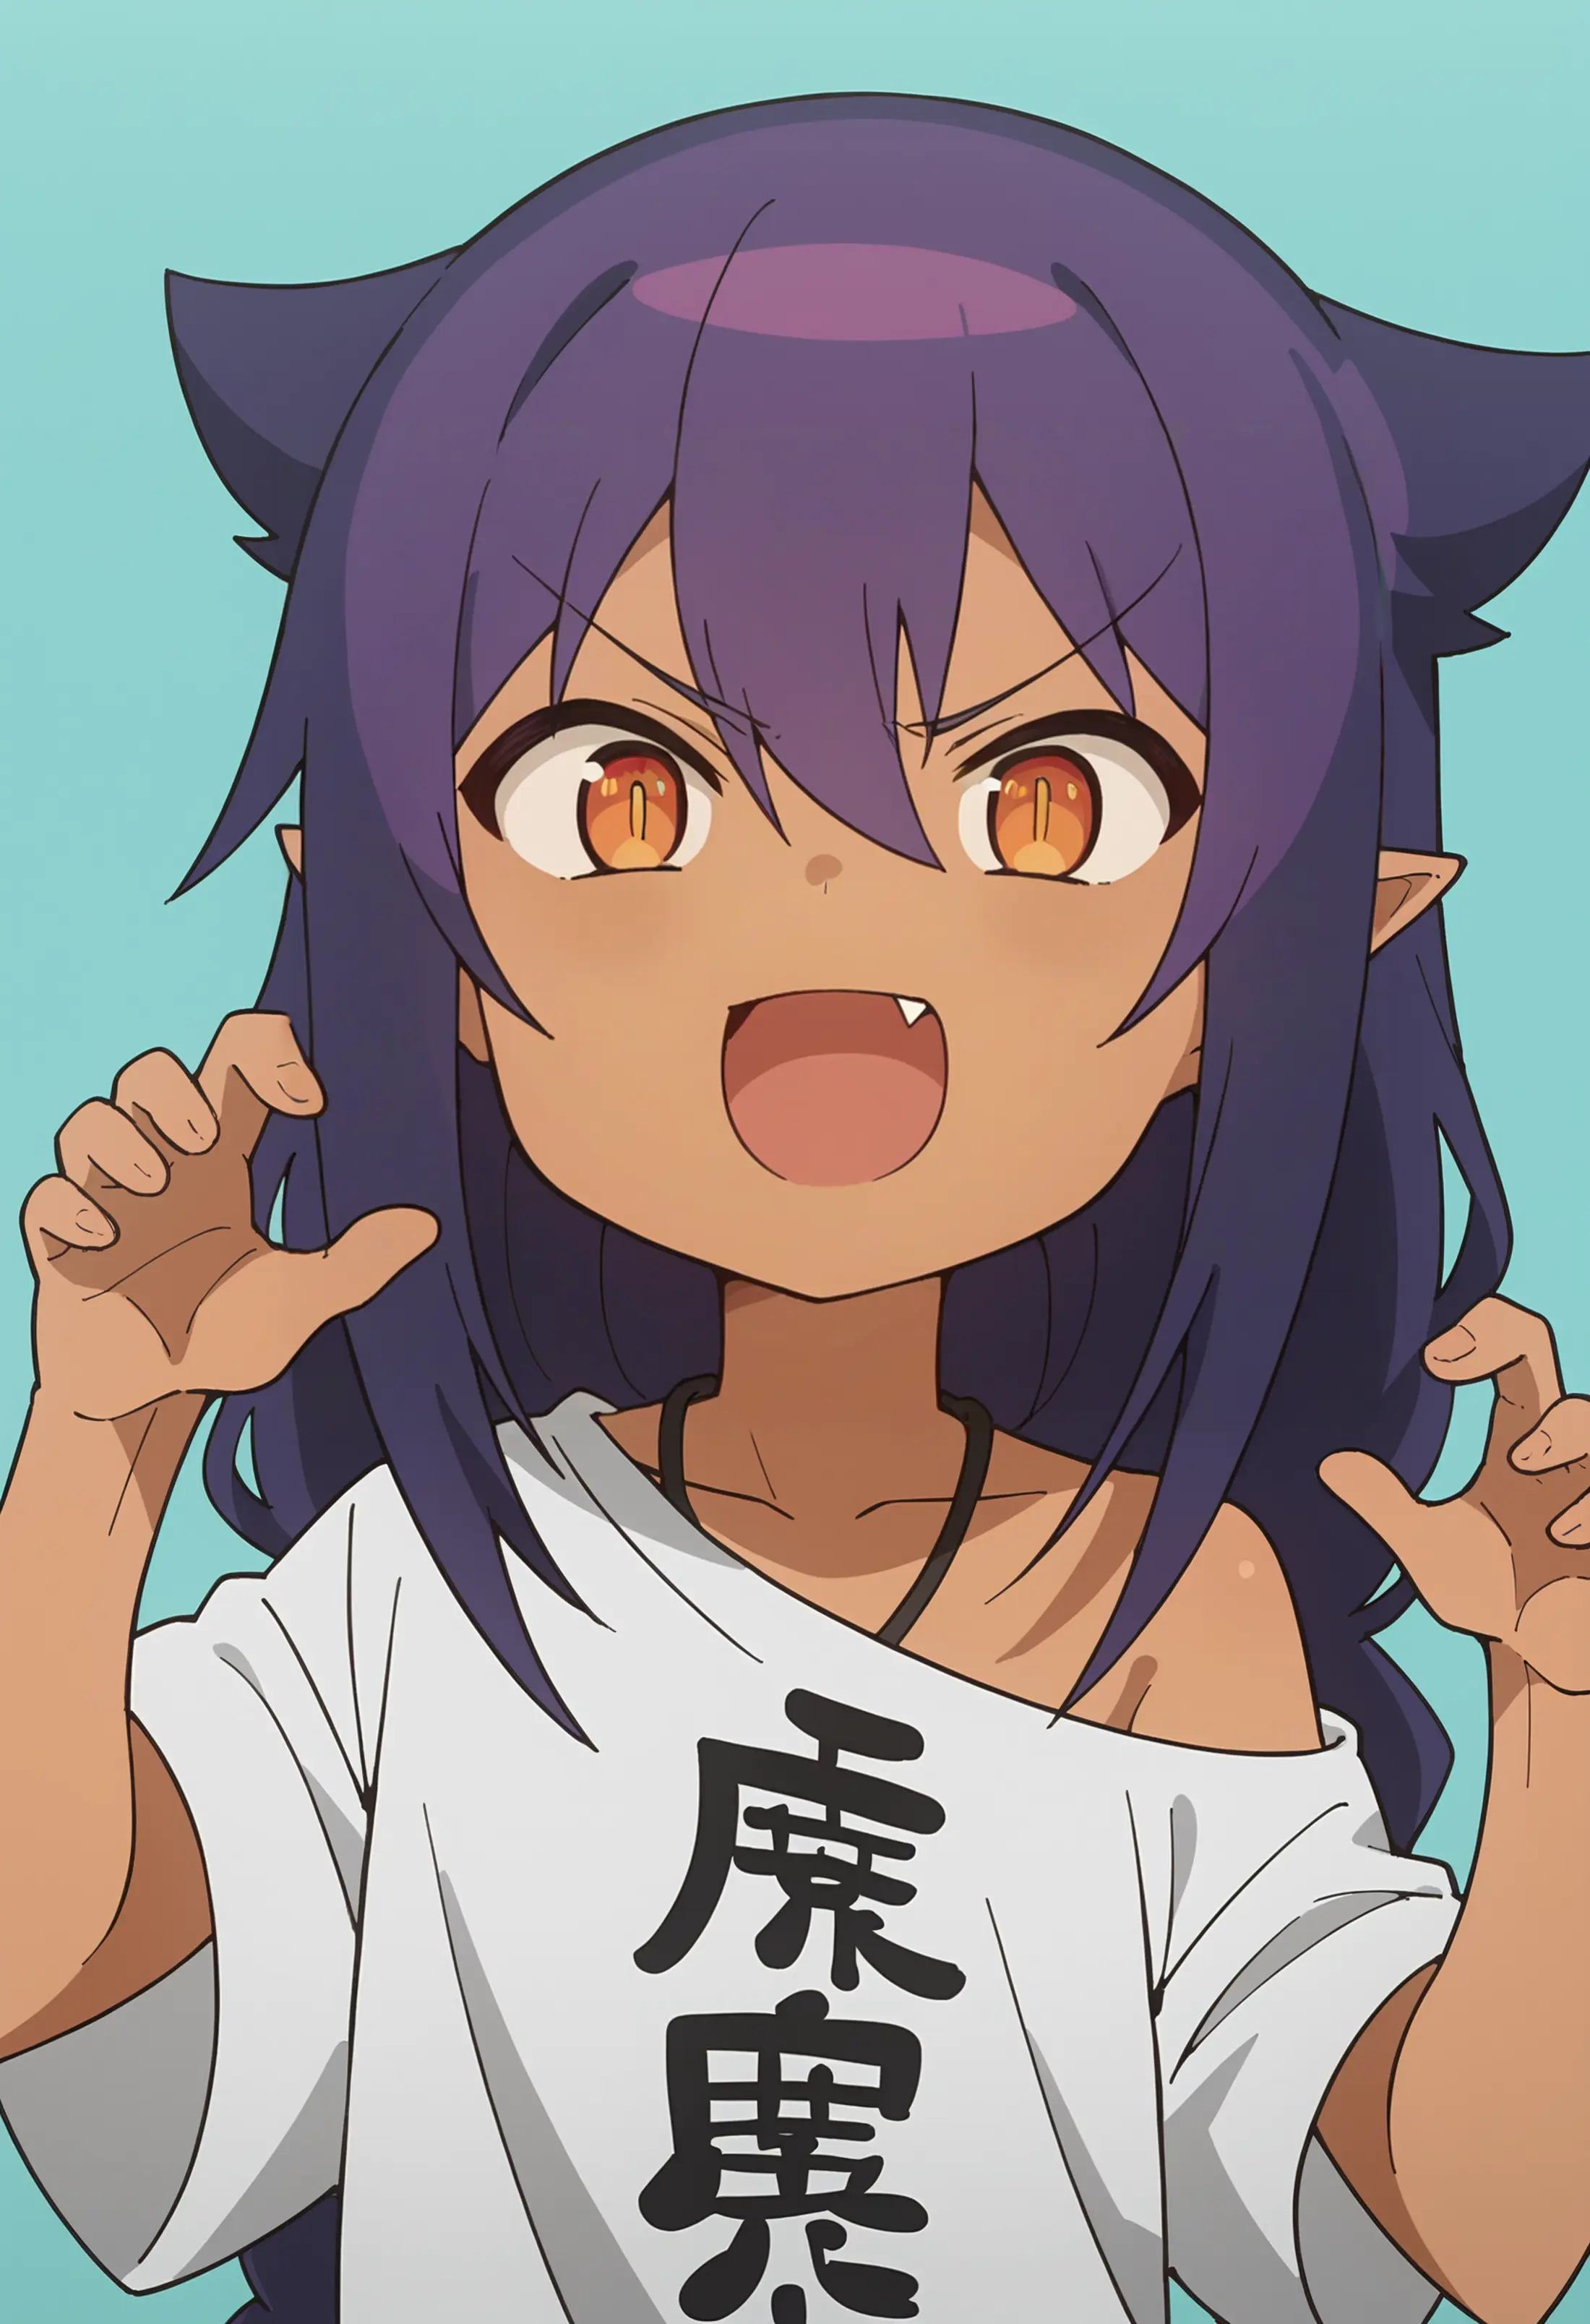 A girl with vibrant purple hair and striking amber eyes making a playful expression with her mouth open. She is wearing a white top with garbled text on it and has her hands raised in a claw-like gesture. 